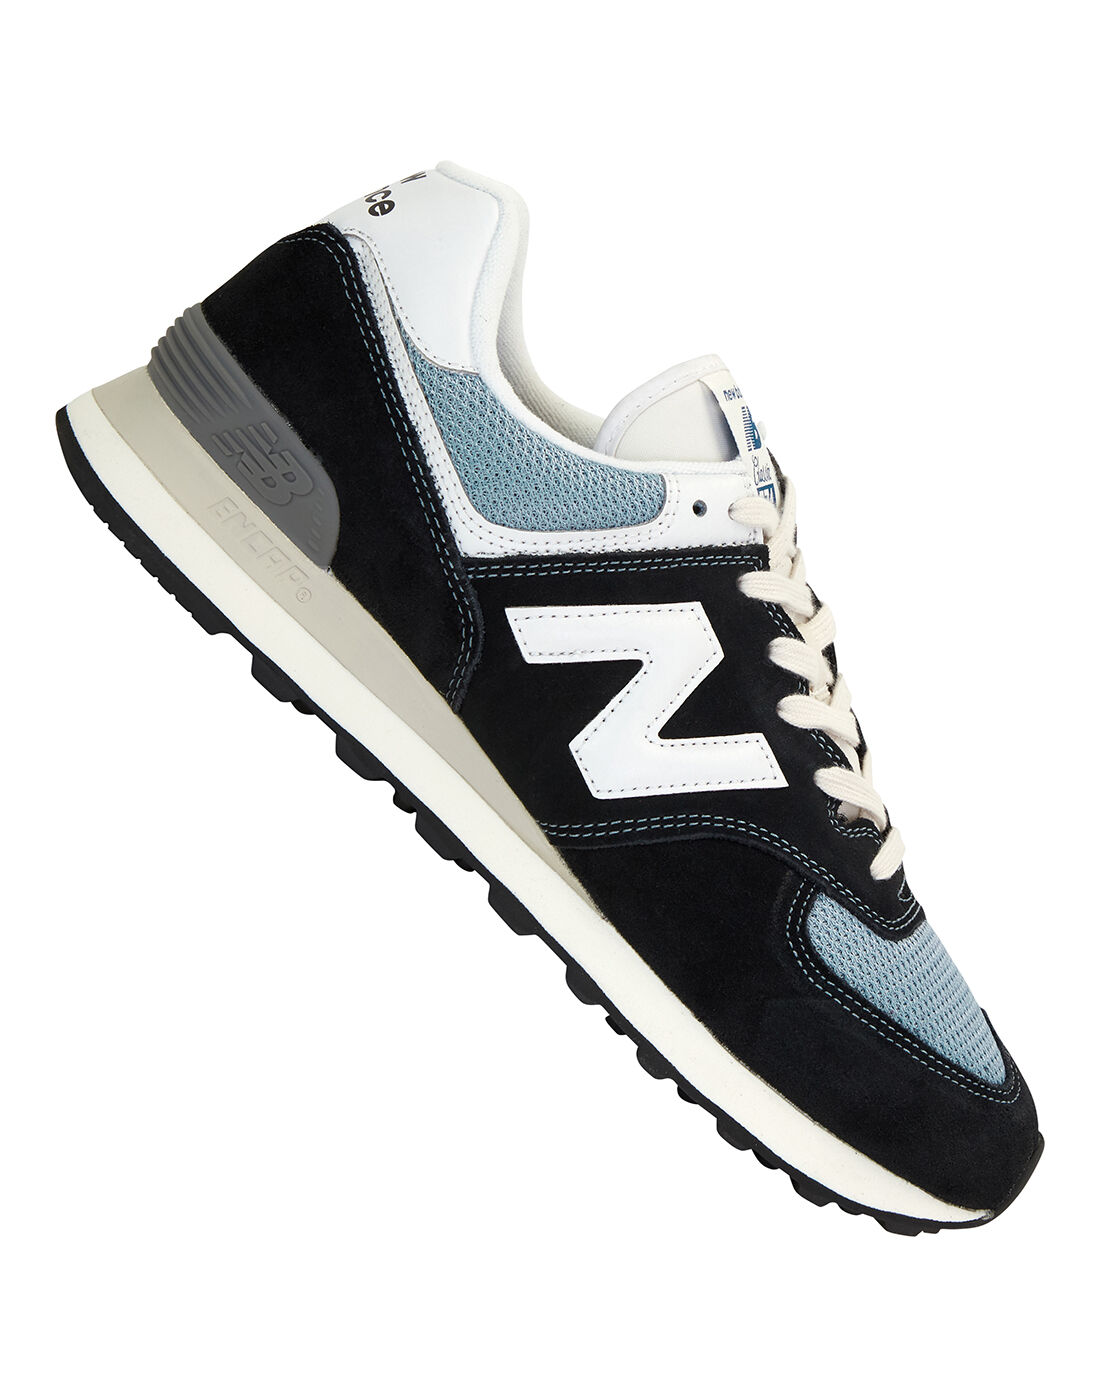 new balance black limited edition 574 trainers